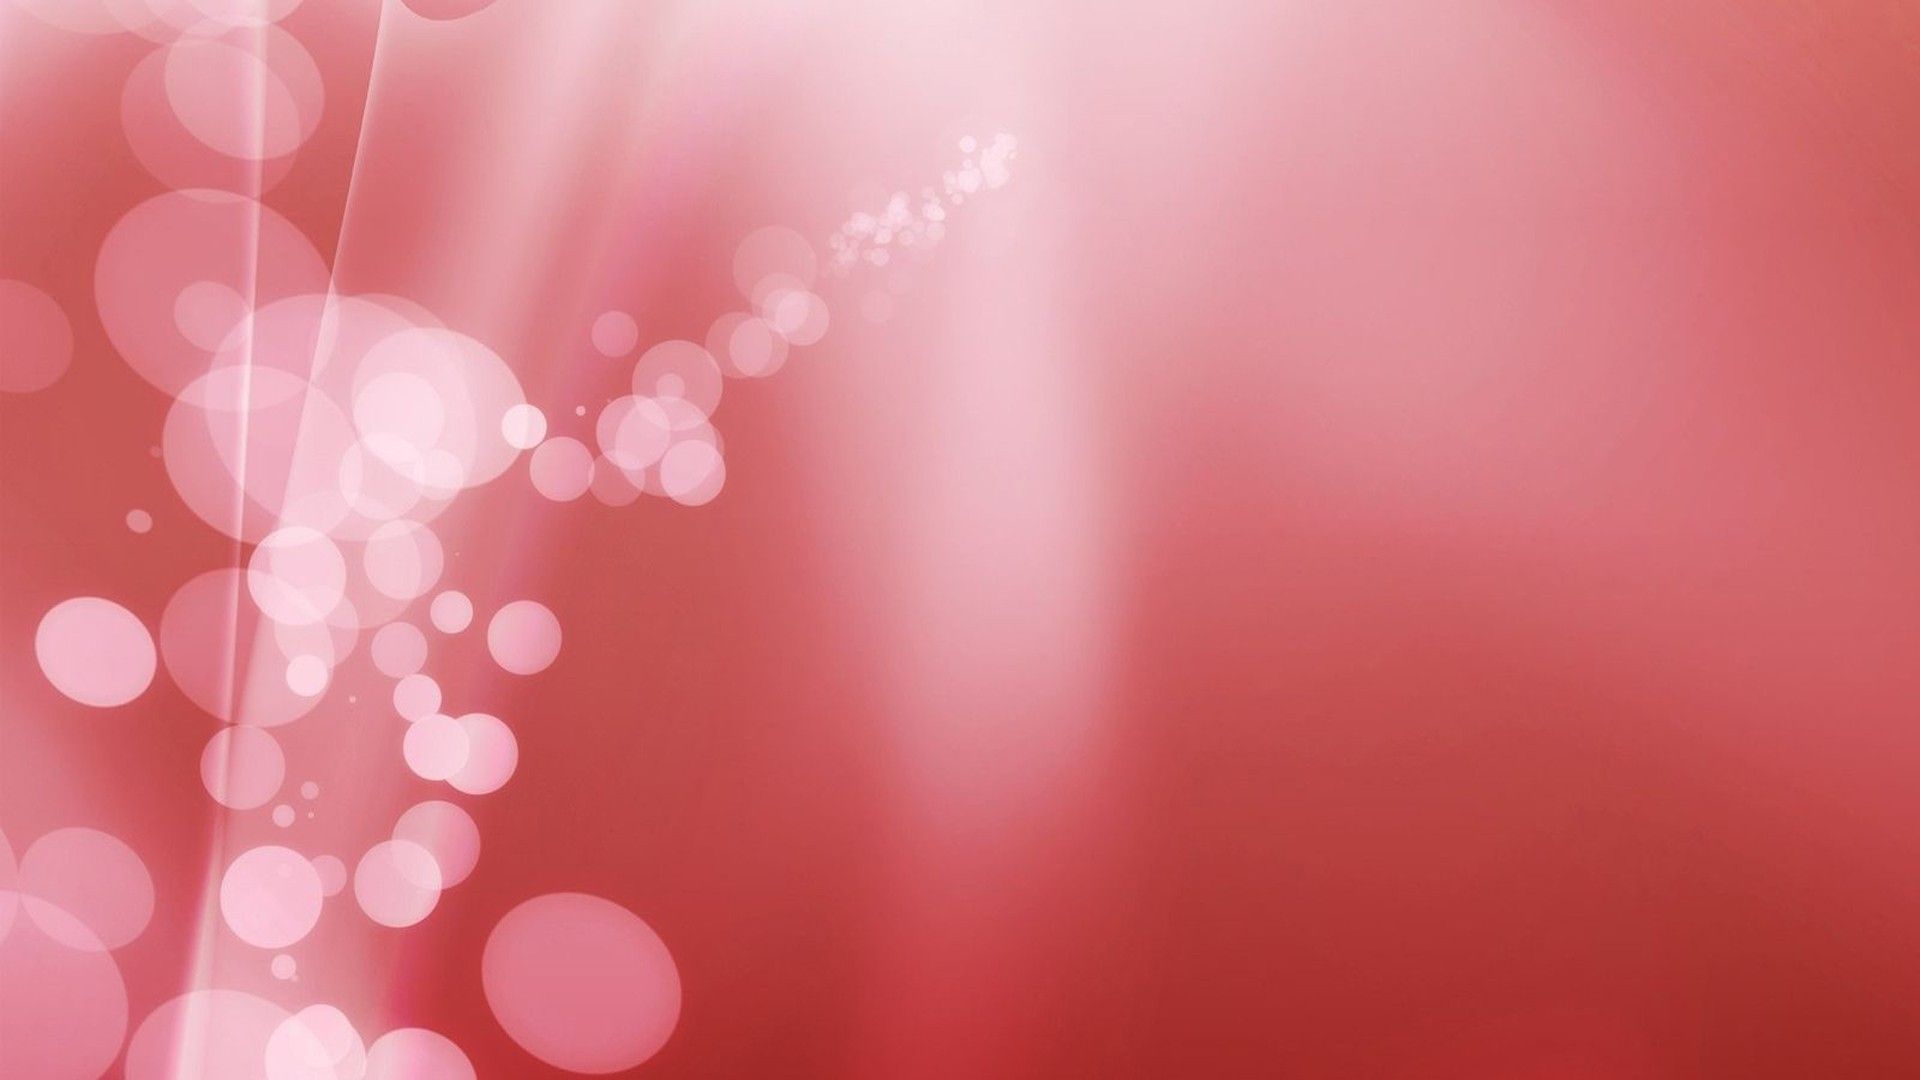 A pink background with bubbles and dots - Light red